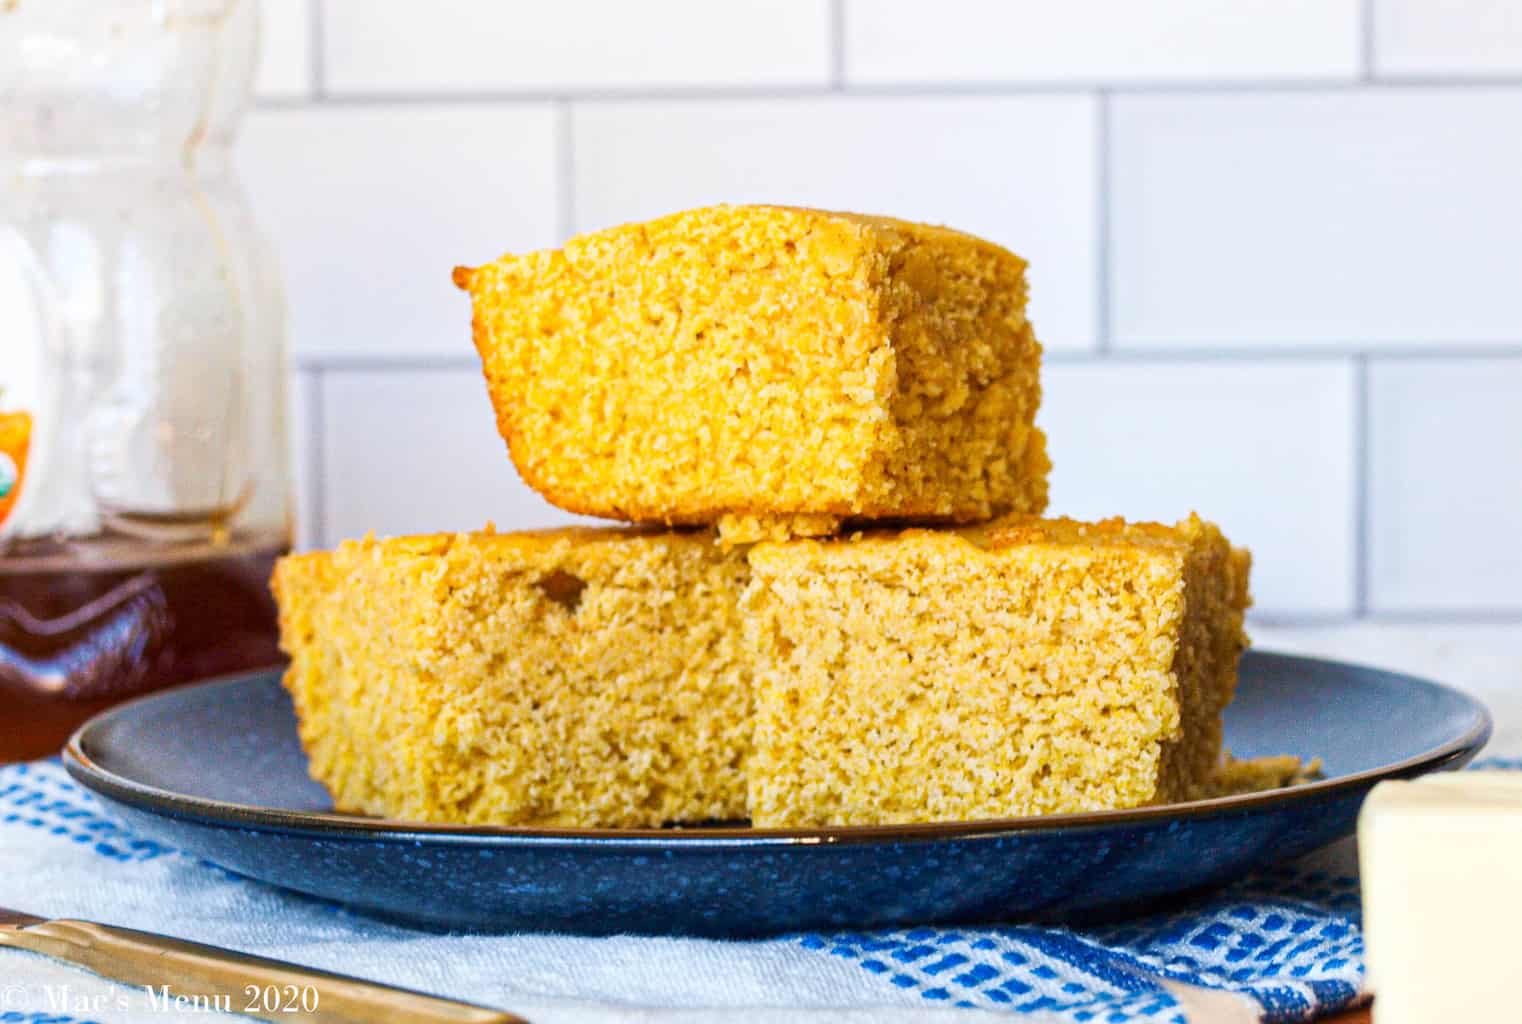 A Stack of gluten-free corn bread on a blue plate with white tile in the background